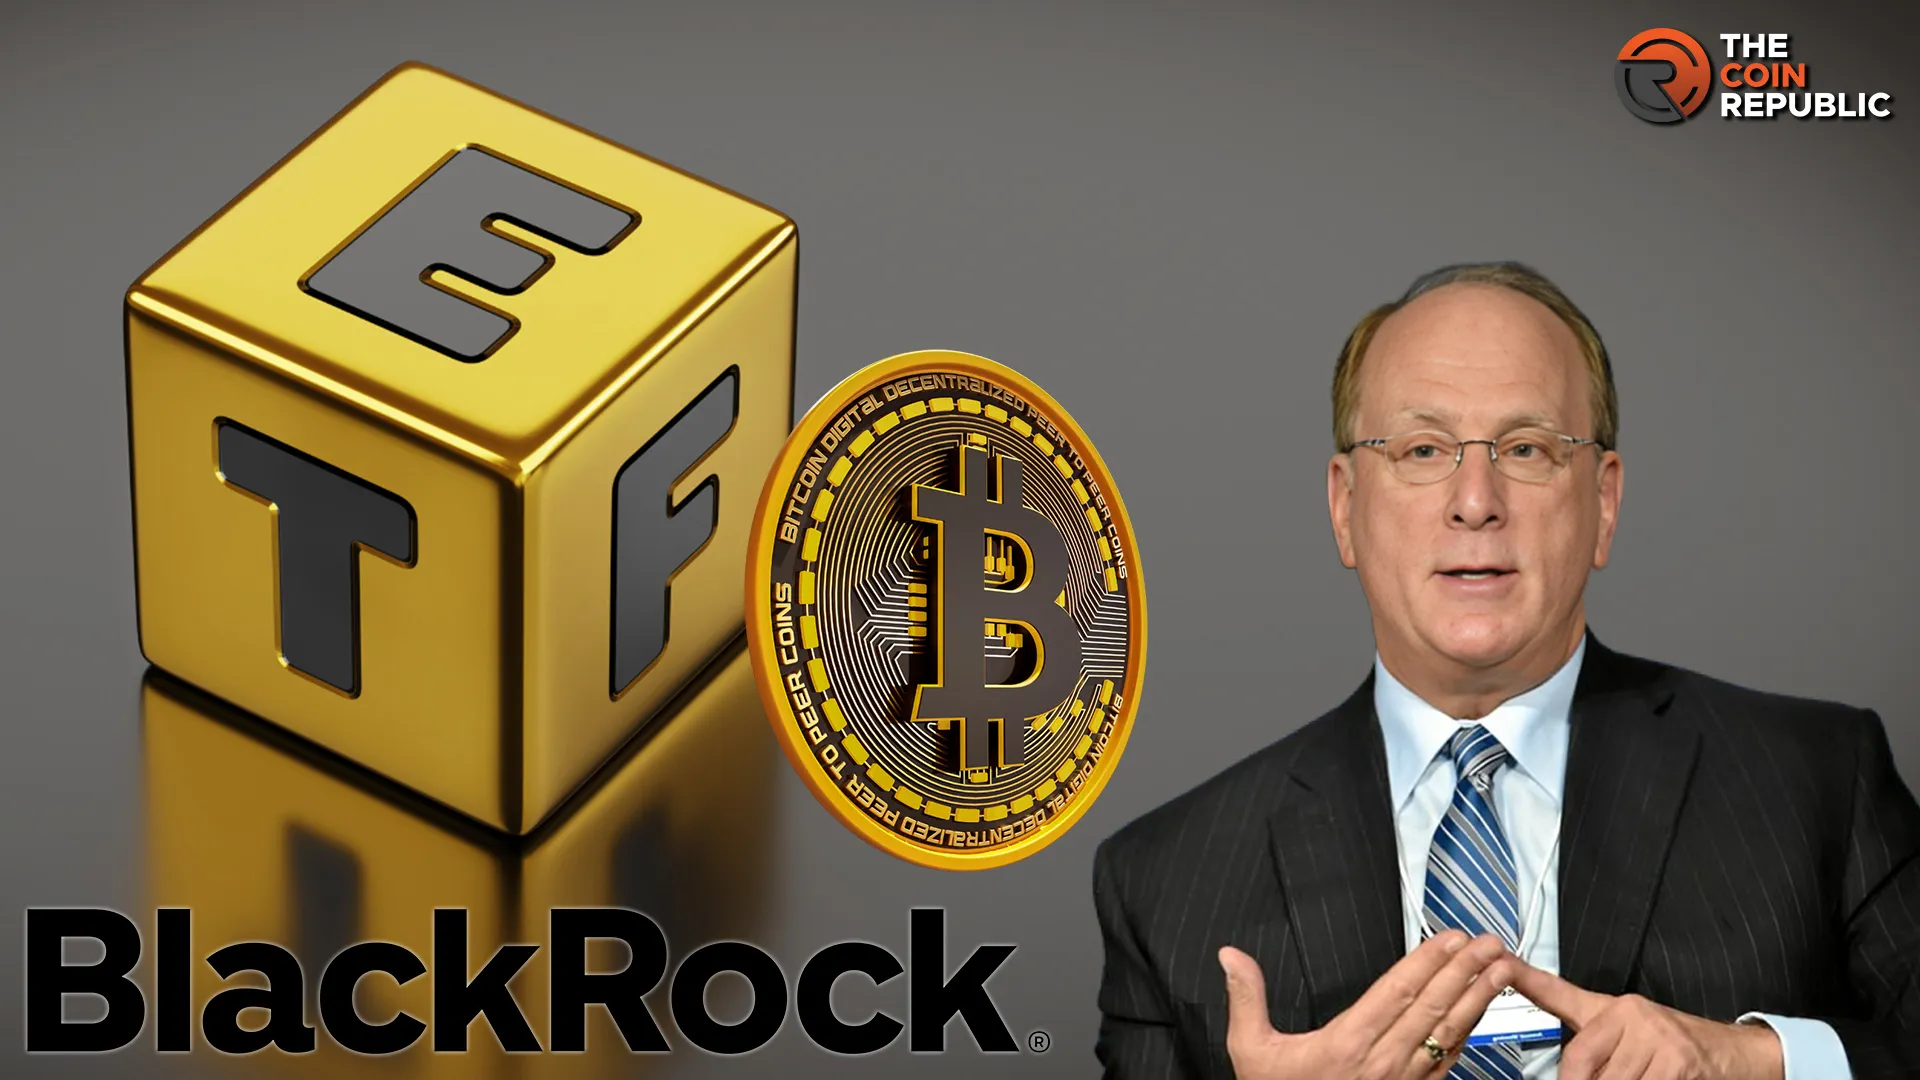 BlackRock CEO, Fink, Sees a Viable Future for the Bitcoin ETF